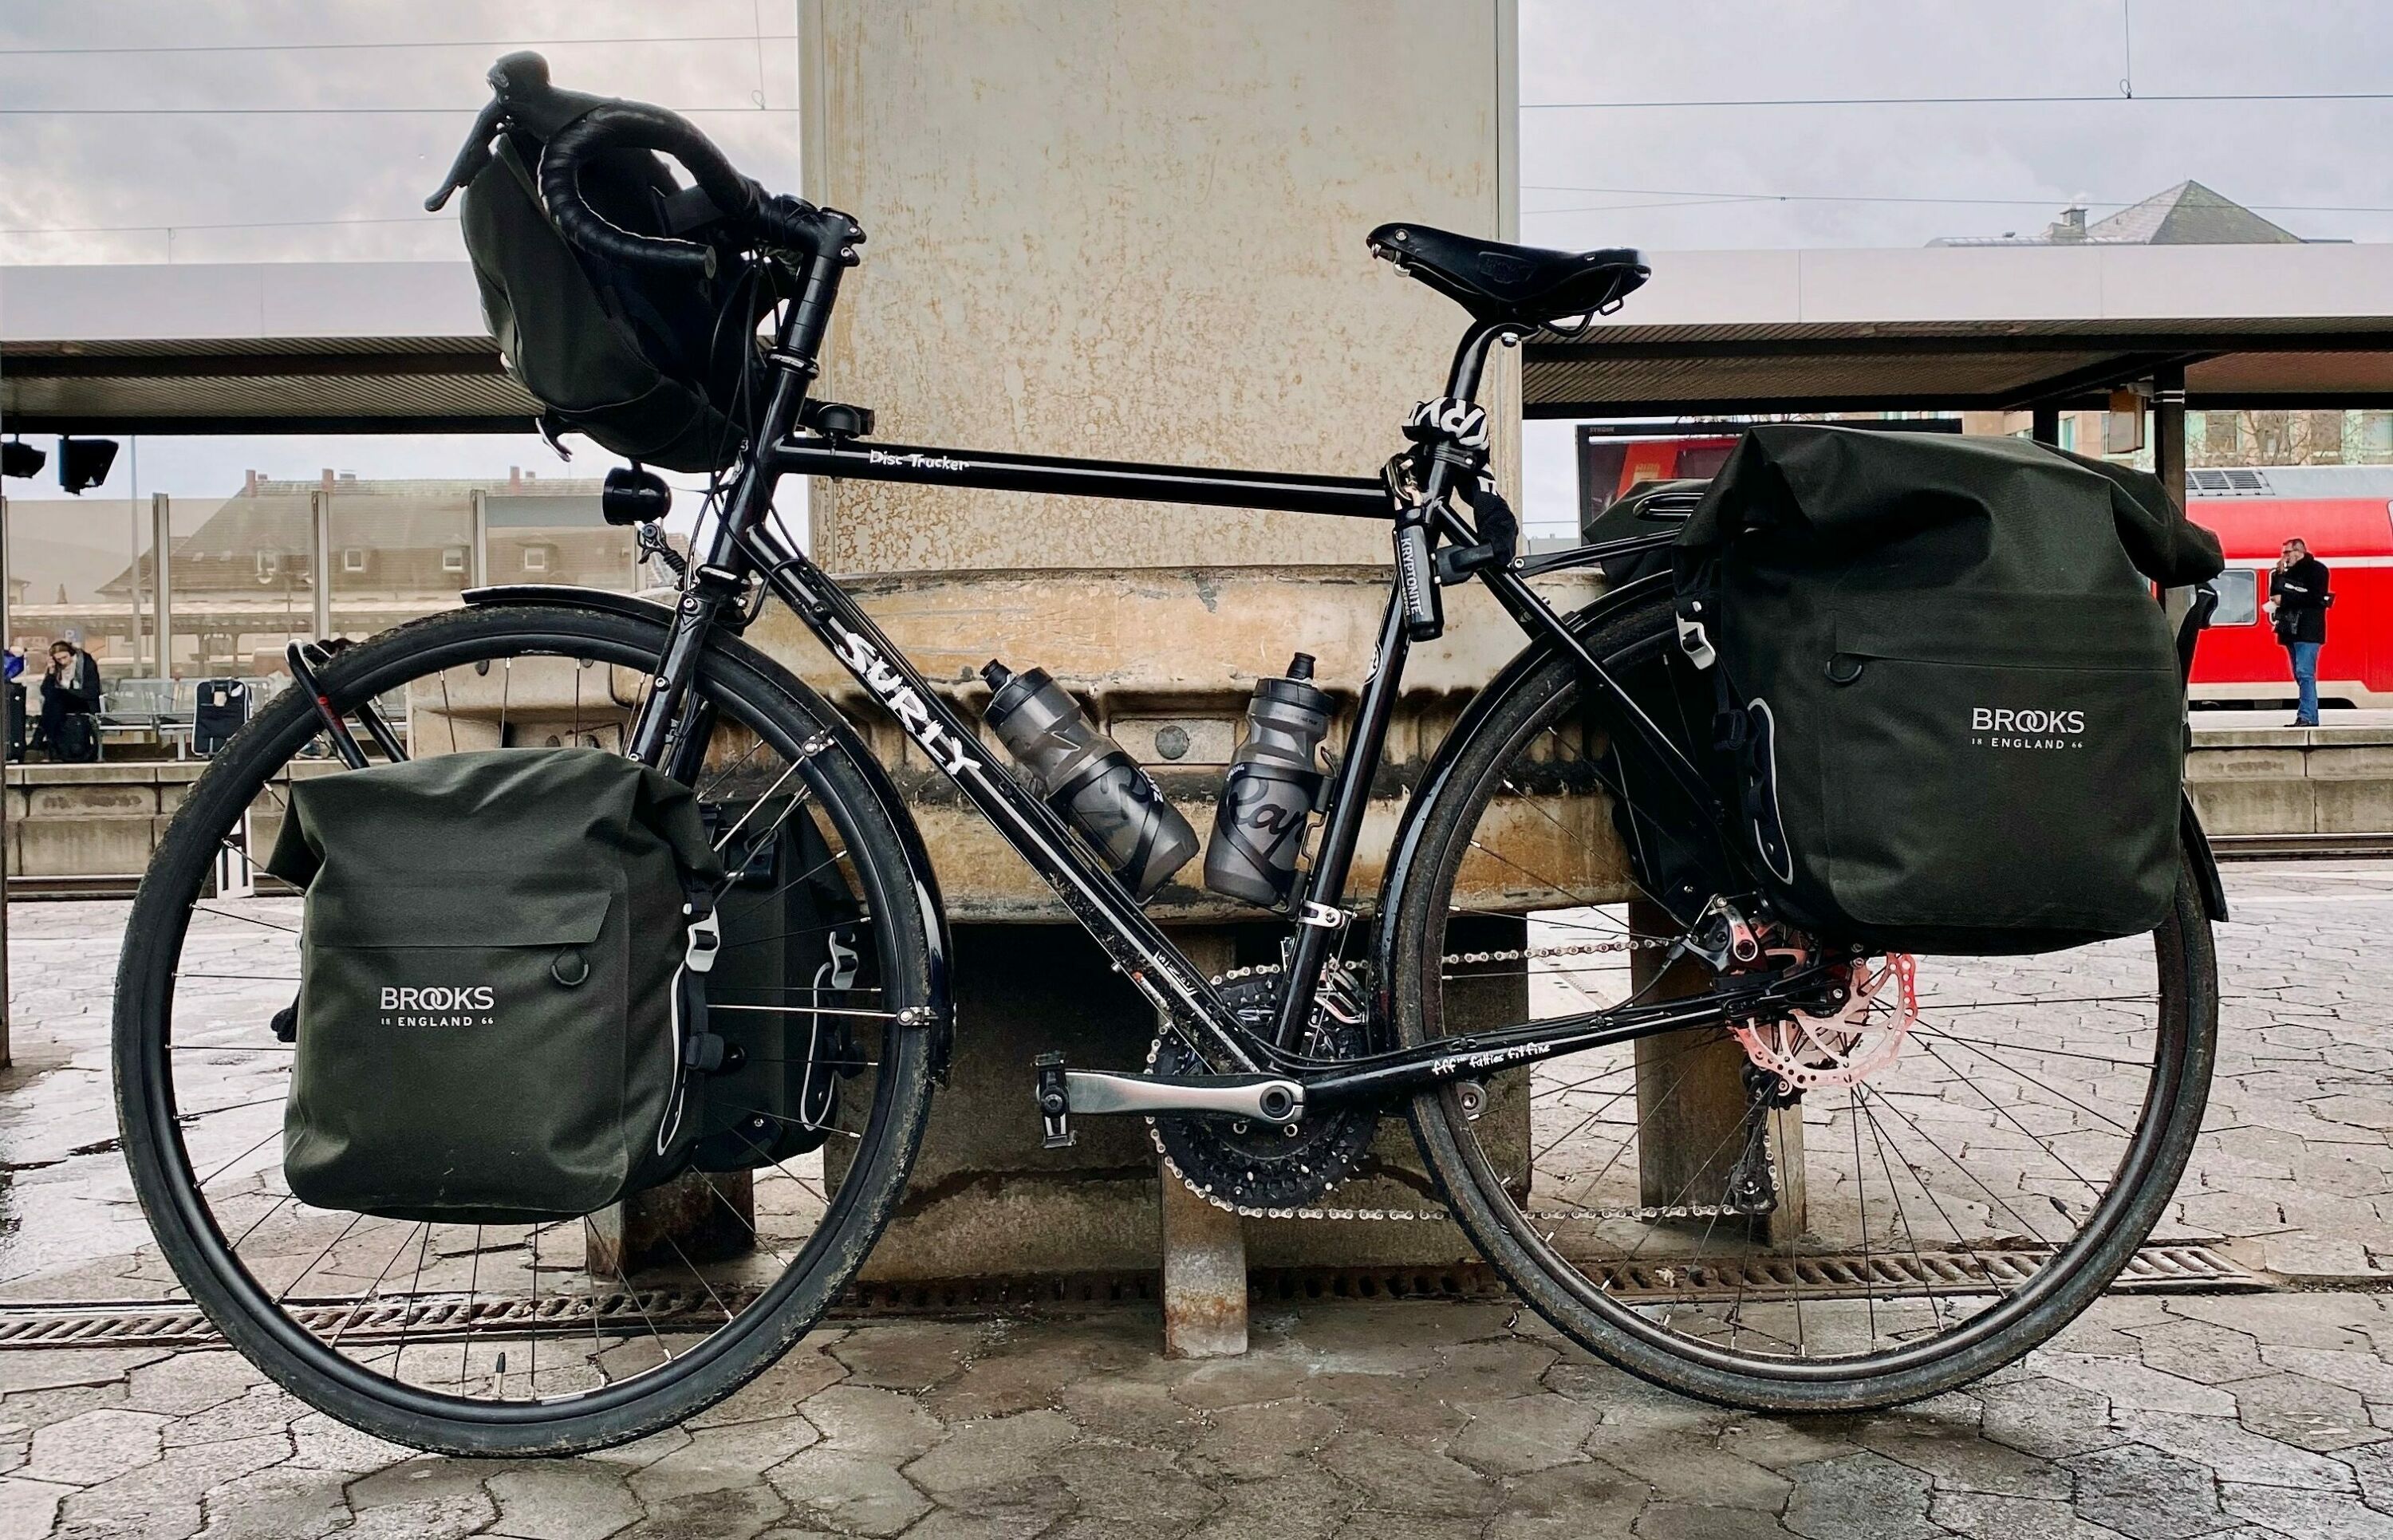 My Surly Long Haul Trucker. Waiting for the train to Berlin.